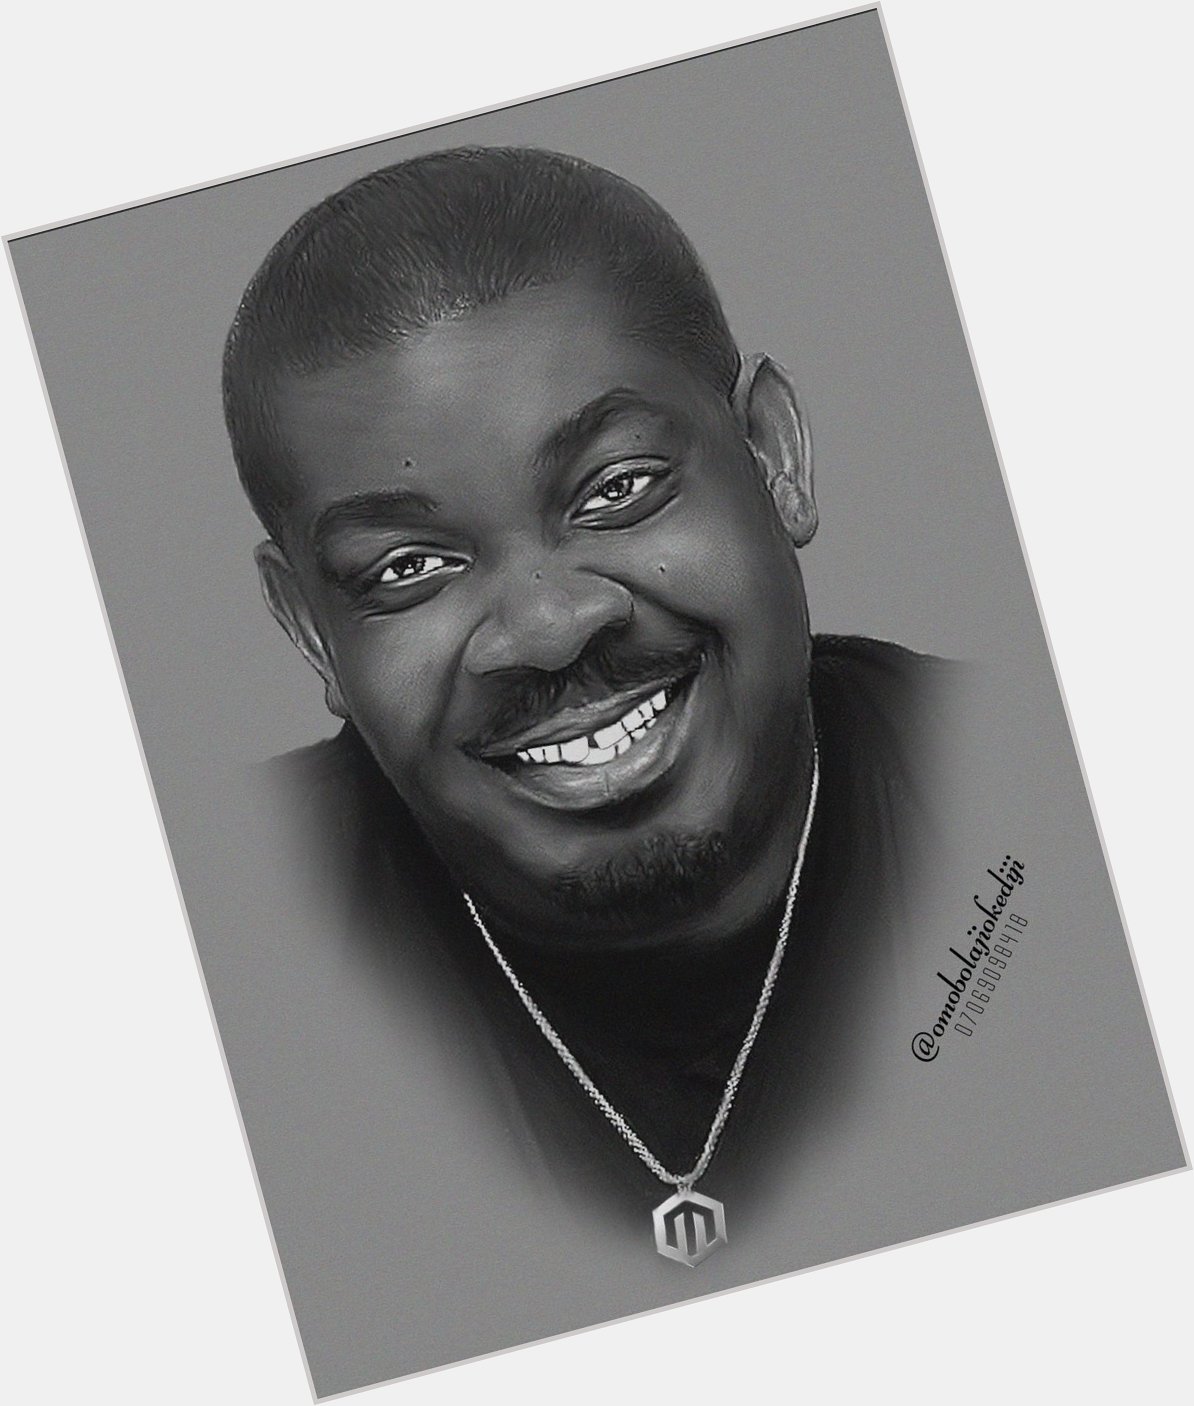 Happy Birthday Don Jazzy
Continue to be a blessing boss    